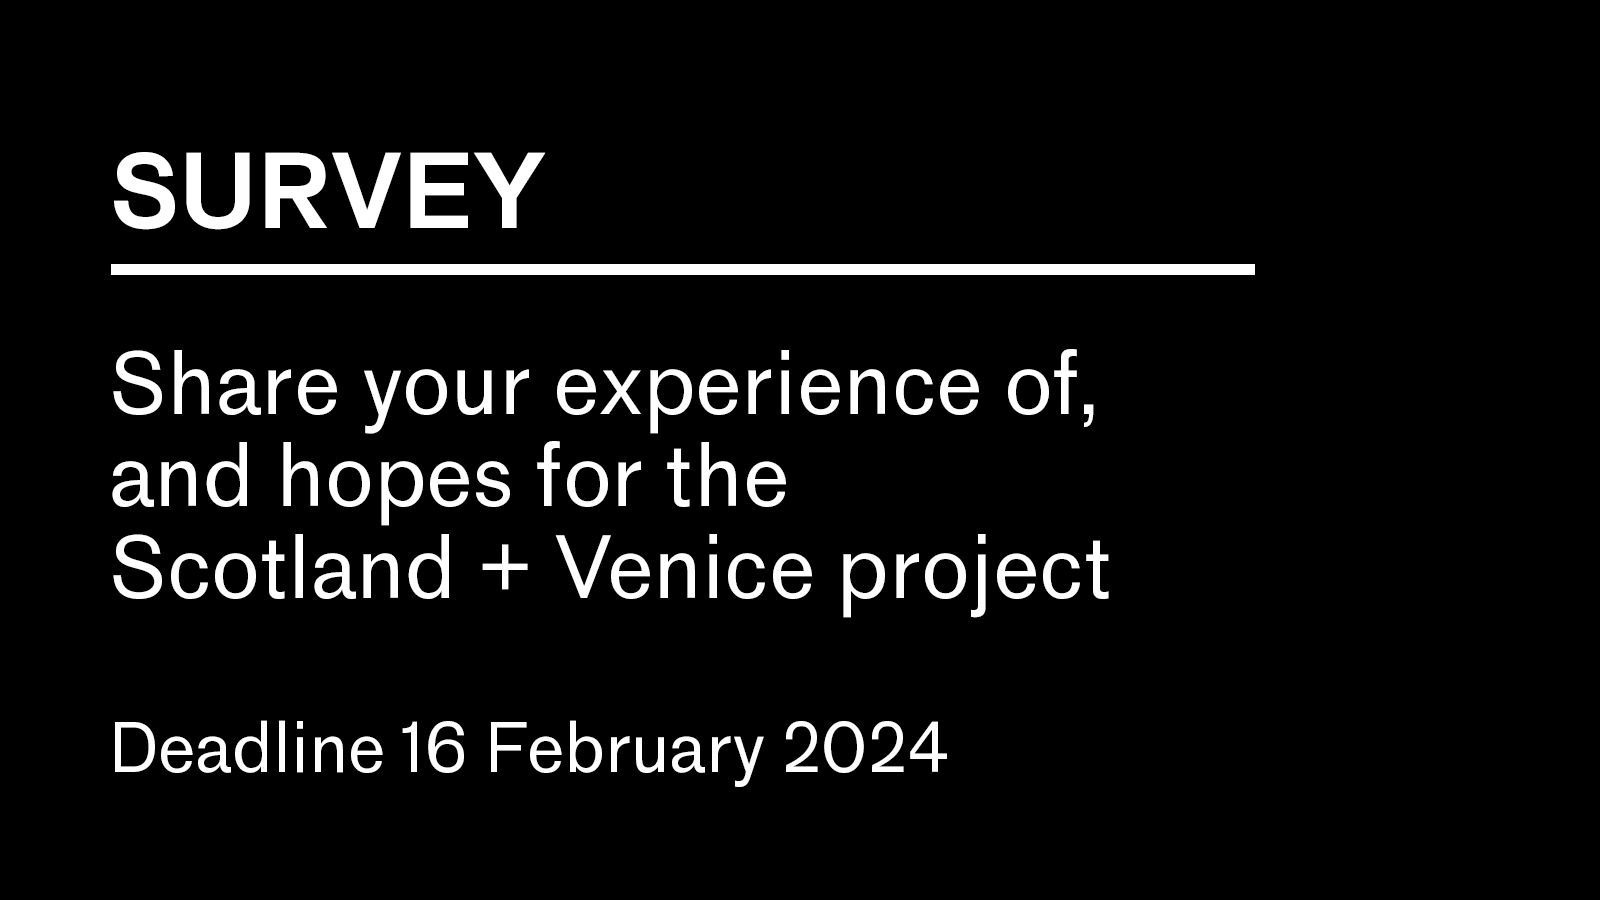 Survey Share your experience of, and hopes for the Scotland + Venice project. Deadline 16 February 2024.